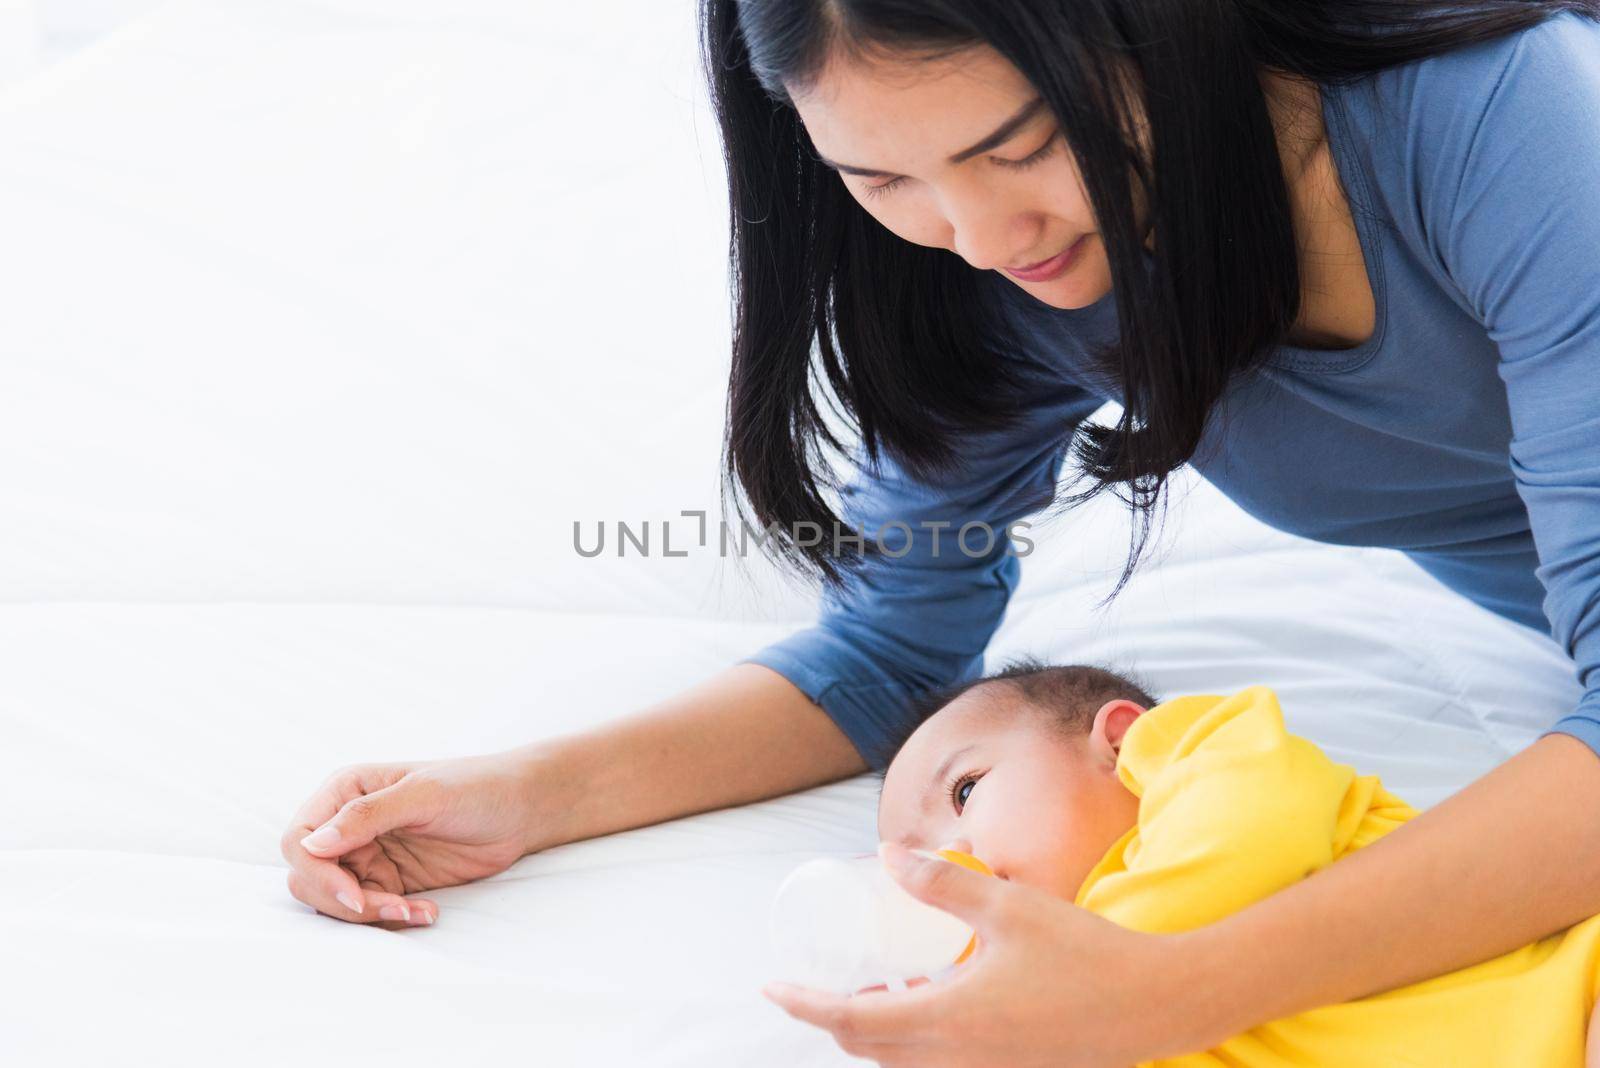 mother holding and feeding infant newborn baby from milk bottle by Sorapop